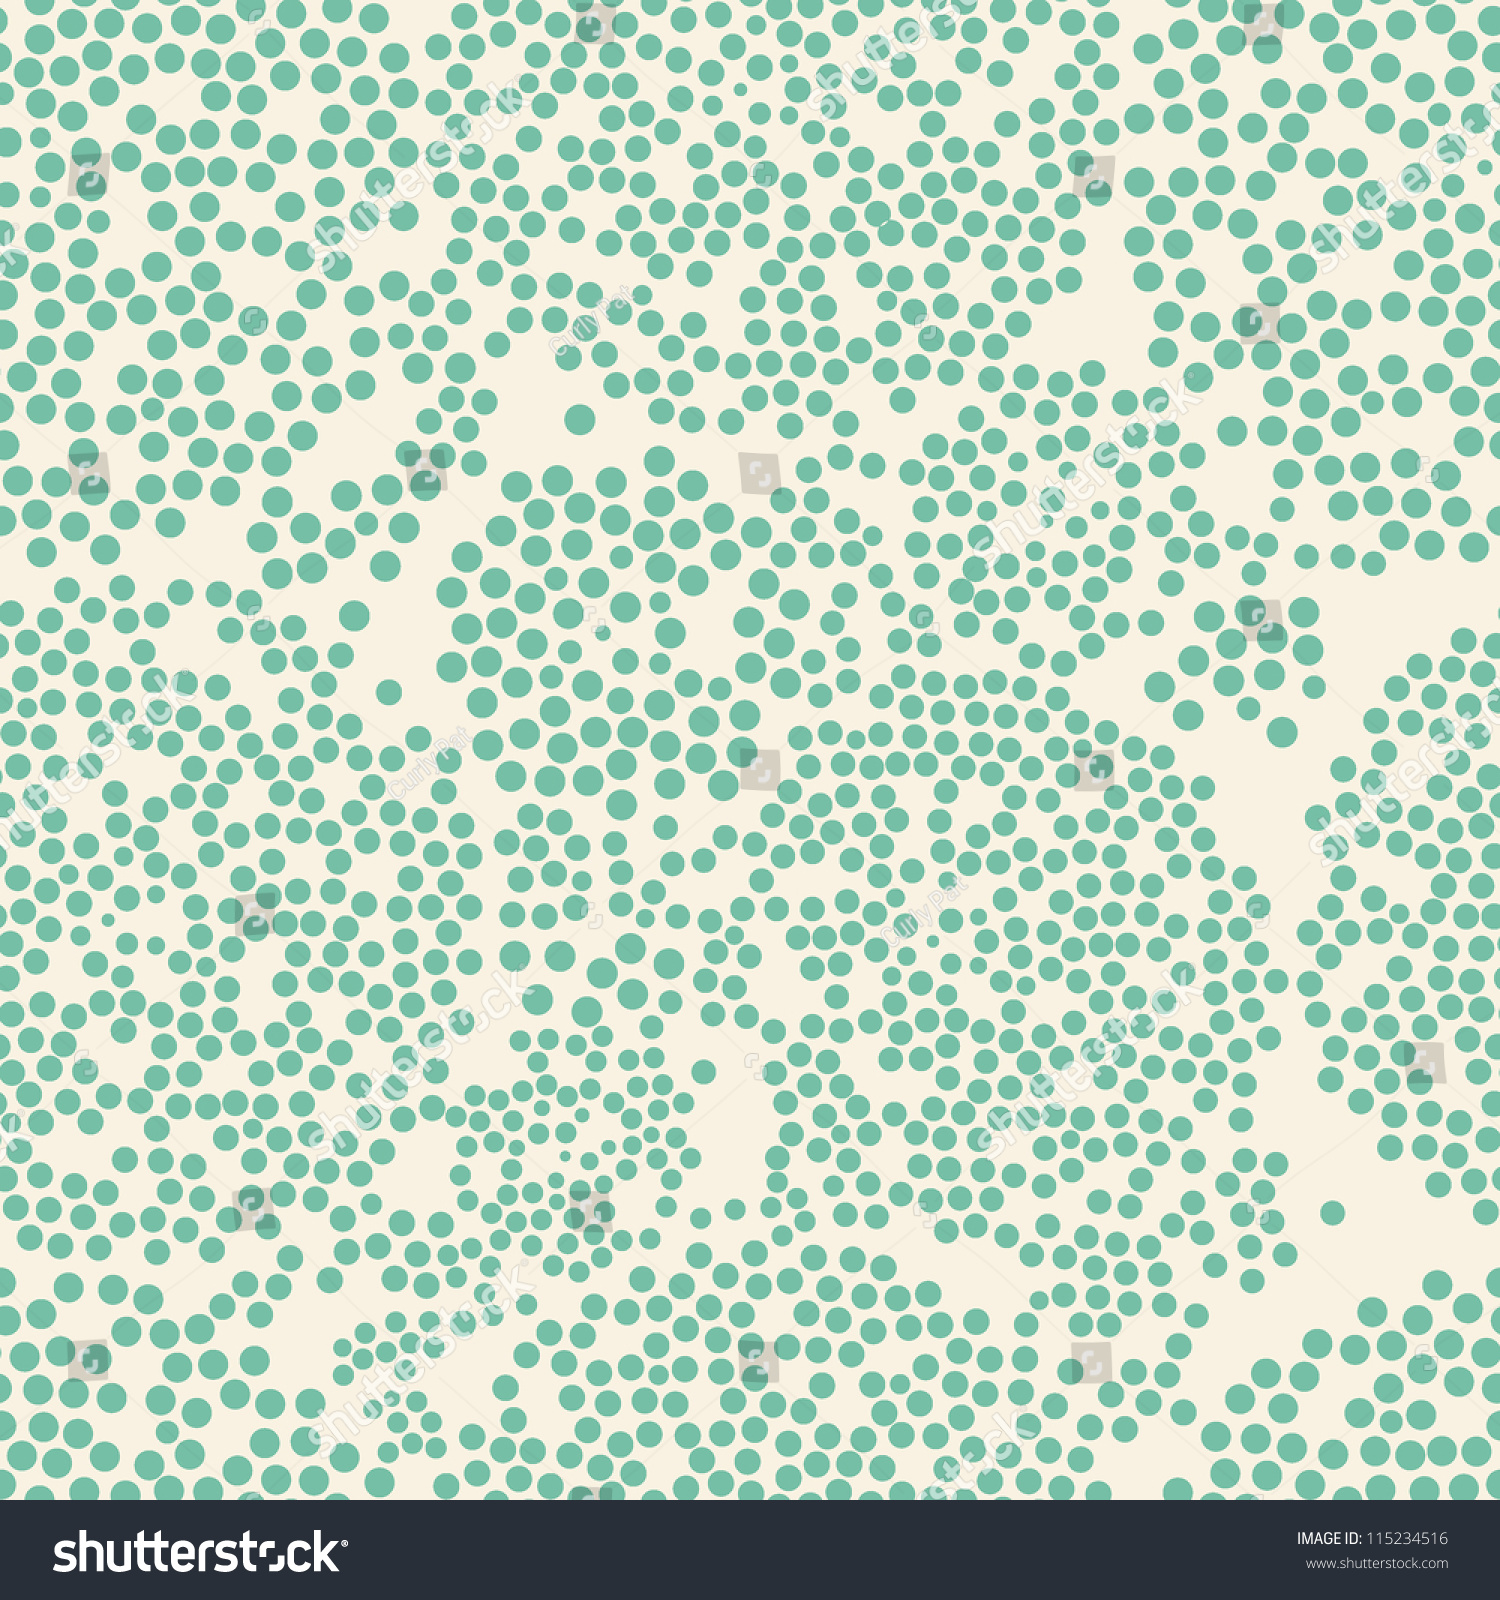 Seamless Pattern With Chaotic Dots. Vector Soft Texture - 115234516 ...